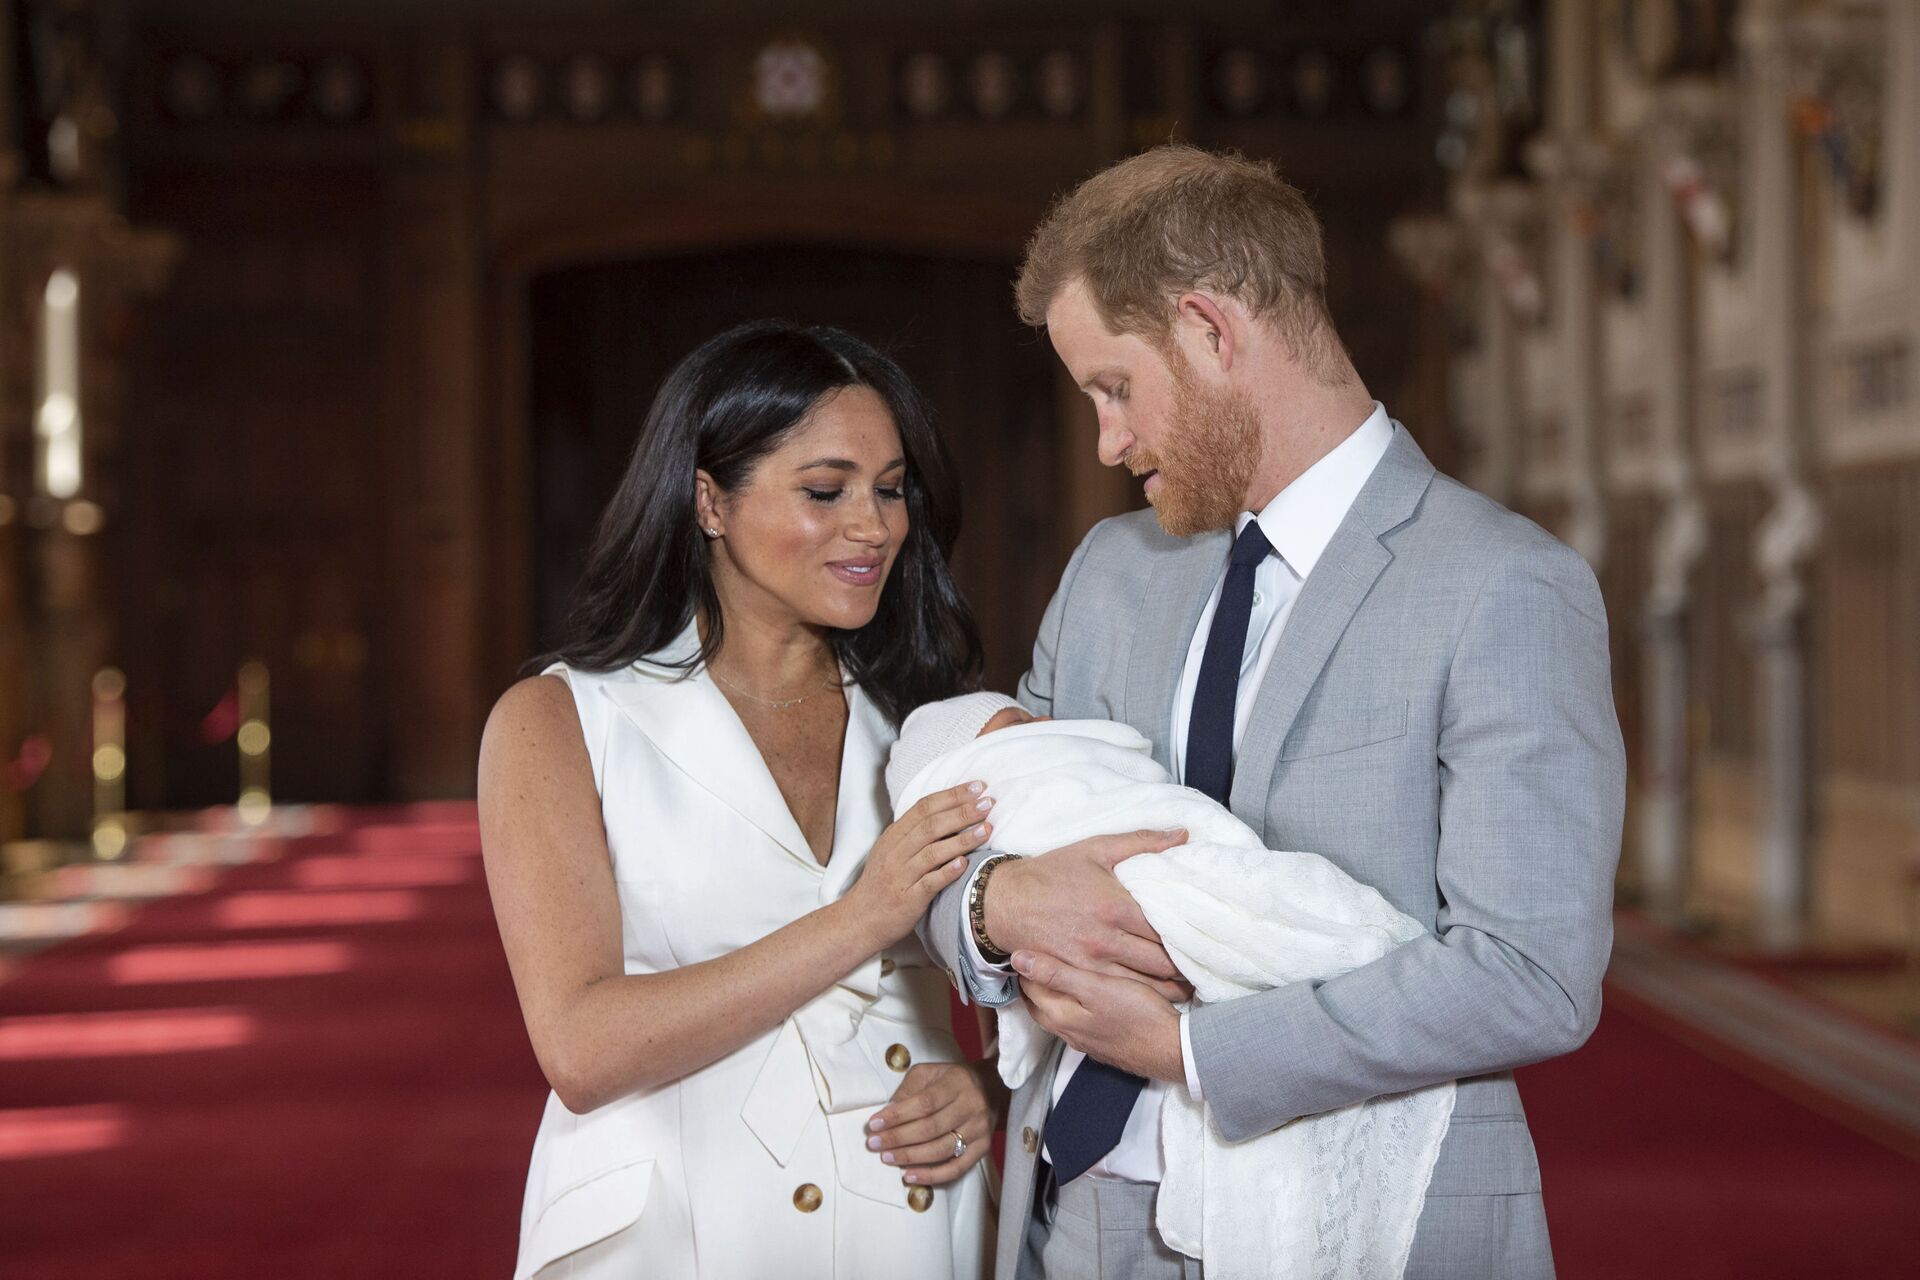 In this Wednesday May 8, 2019 file photo Britain's Prince Harry and Meghan, Duchess of Sussex, pose during a photocall with their newborn son Archie, in St George's Hall at Windsor Castle, Windsor, south England. The Duchess of Sussex has revealed that she had a miscarriage in July. Meghan described the experience in an opinion piece in the New York Times on Wednesday. She wrote: I knew, as I clutched my firstborn child, that I was losing my second. The former Meghan Markle and husband Prince Harry have a son, Archie, born in 2019.  - Sputnik International, 1920, 22.10.2021